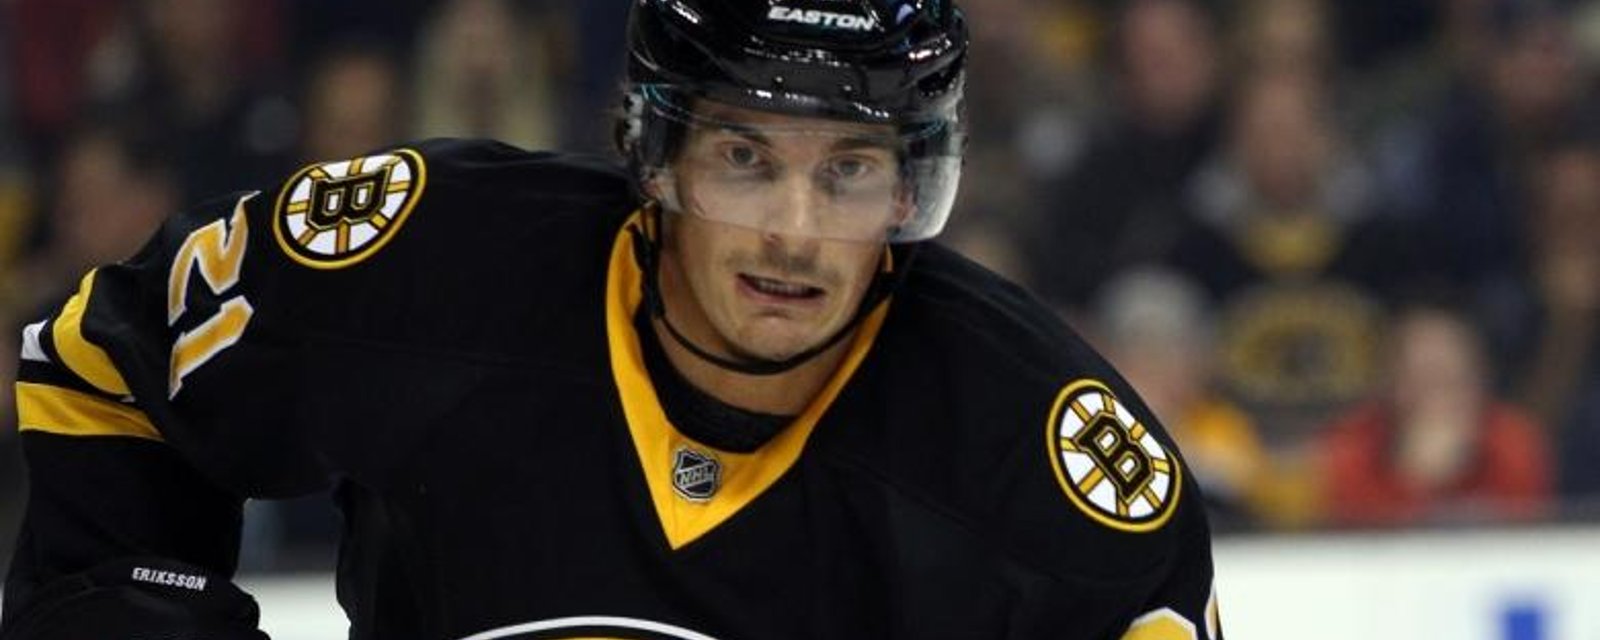 The Bruins take a stance on trading Loui Eriksson.